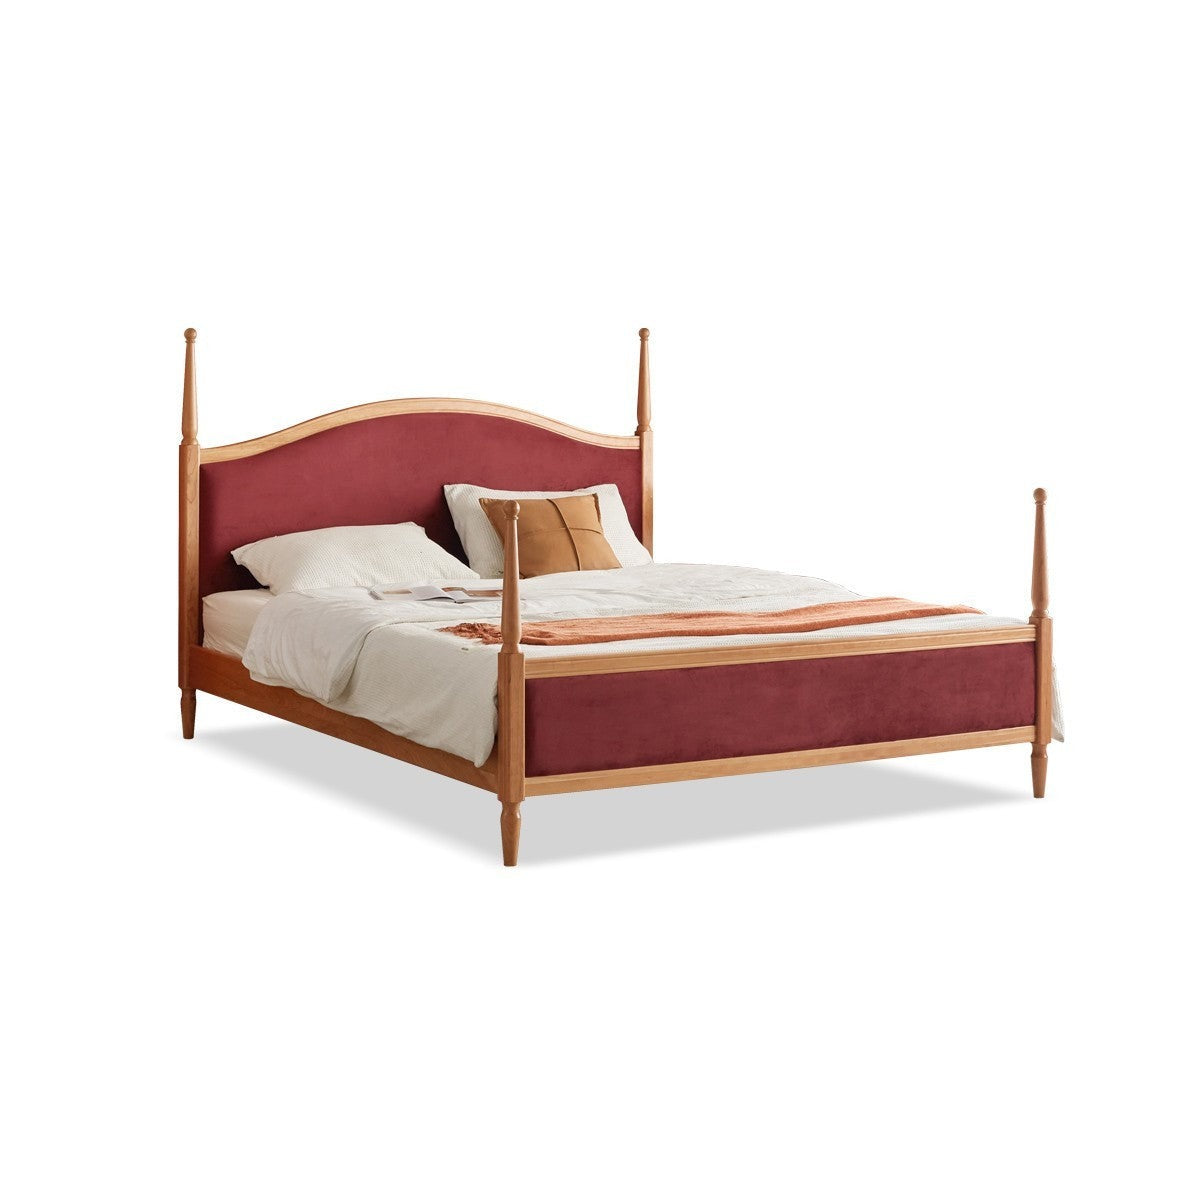 Cherry wood solid wood bed ,Retro style, princess bed_)